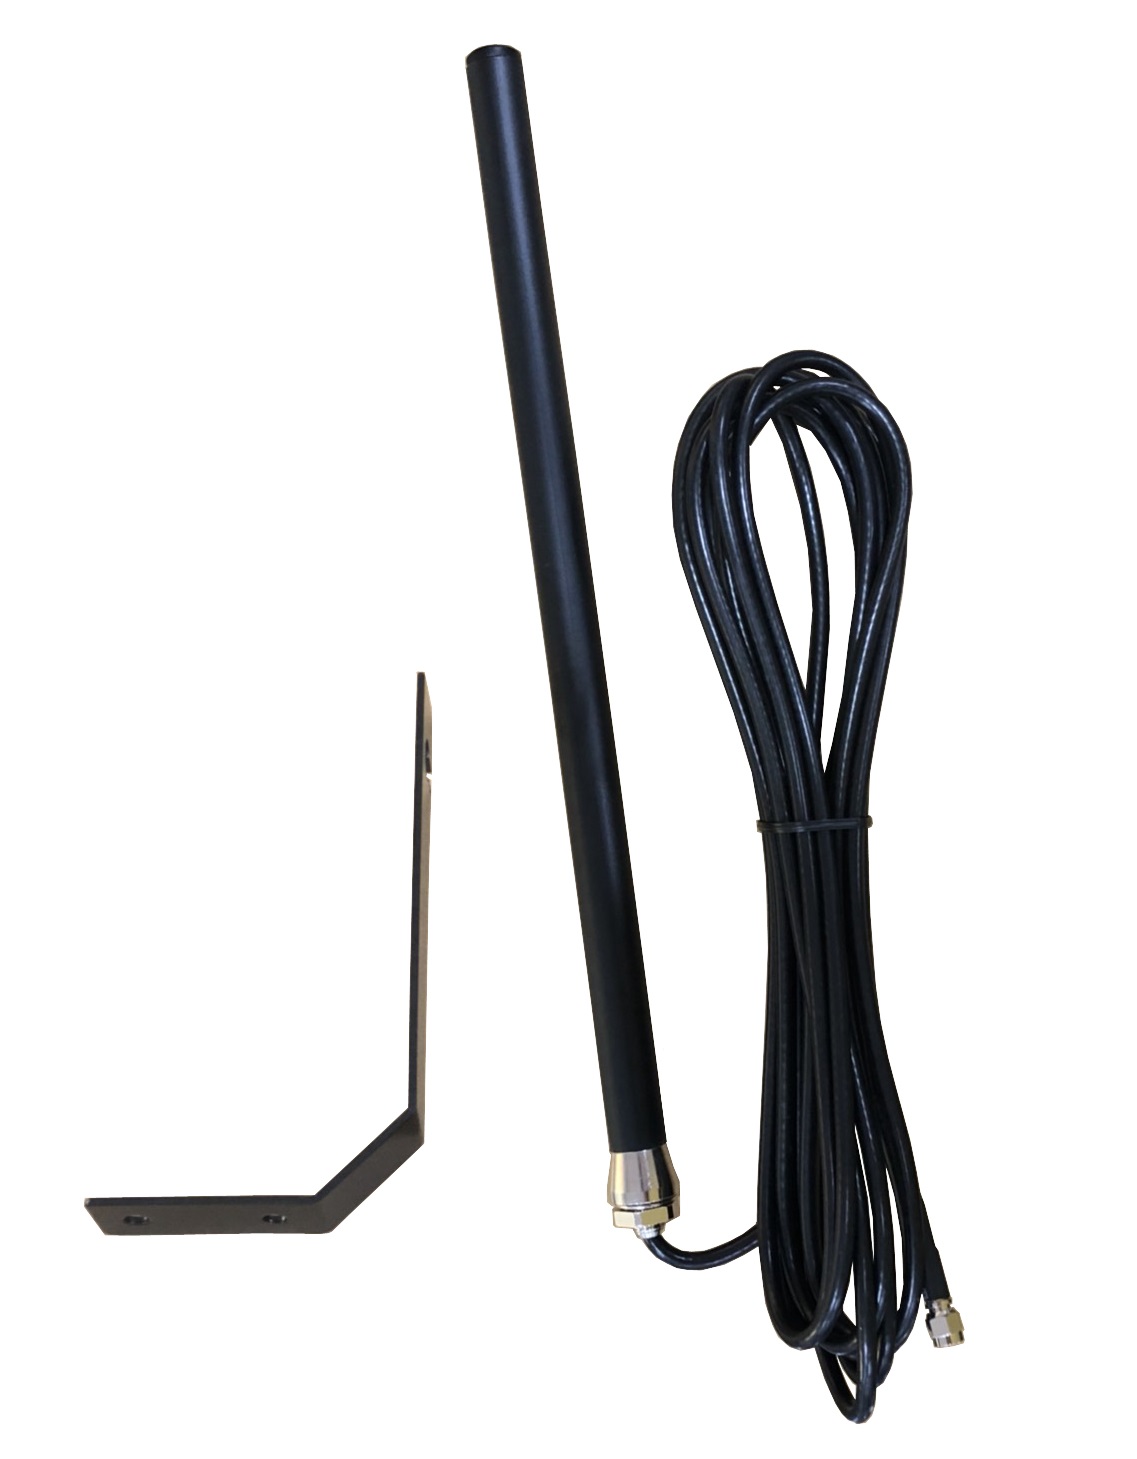 Bus OMNI Antenna for Car Electronic Accessories made by Chinmore Industry Co., LTD.　竣茂工業有限公司 - MatchSupplier.com